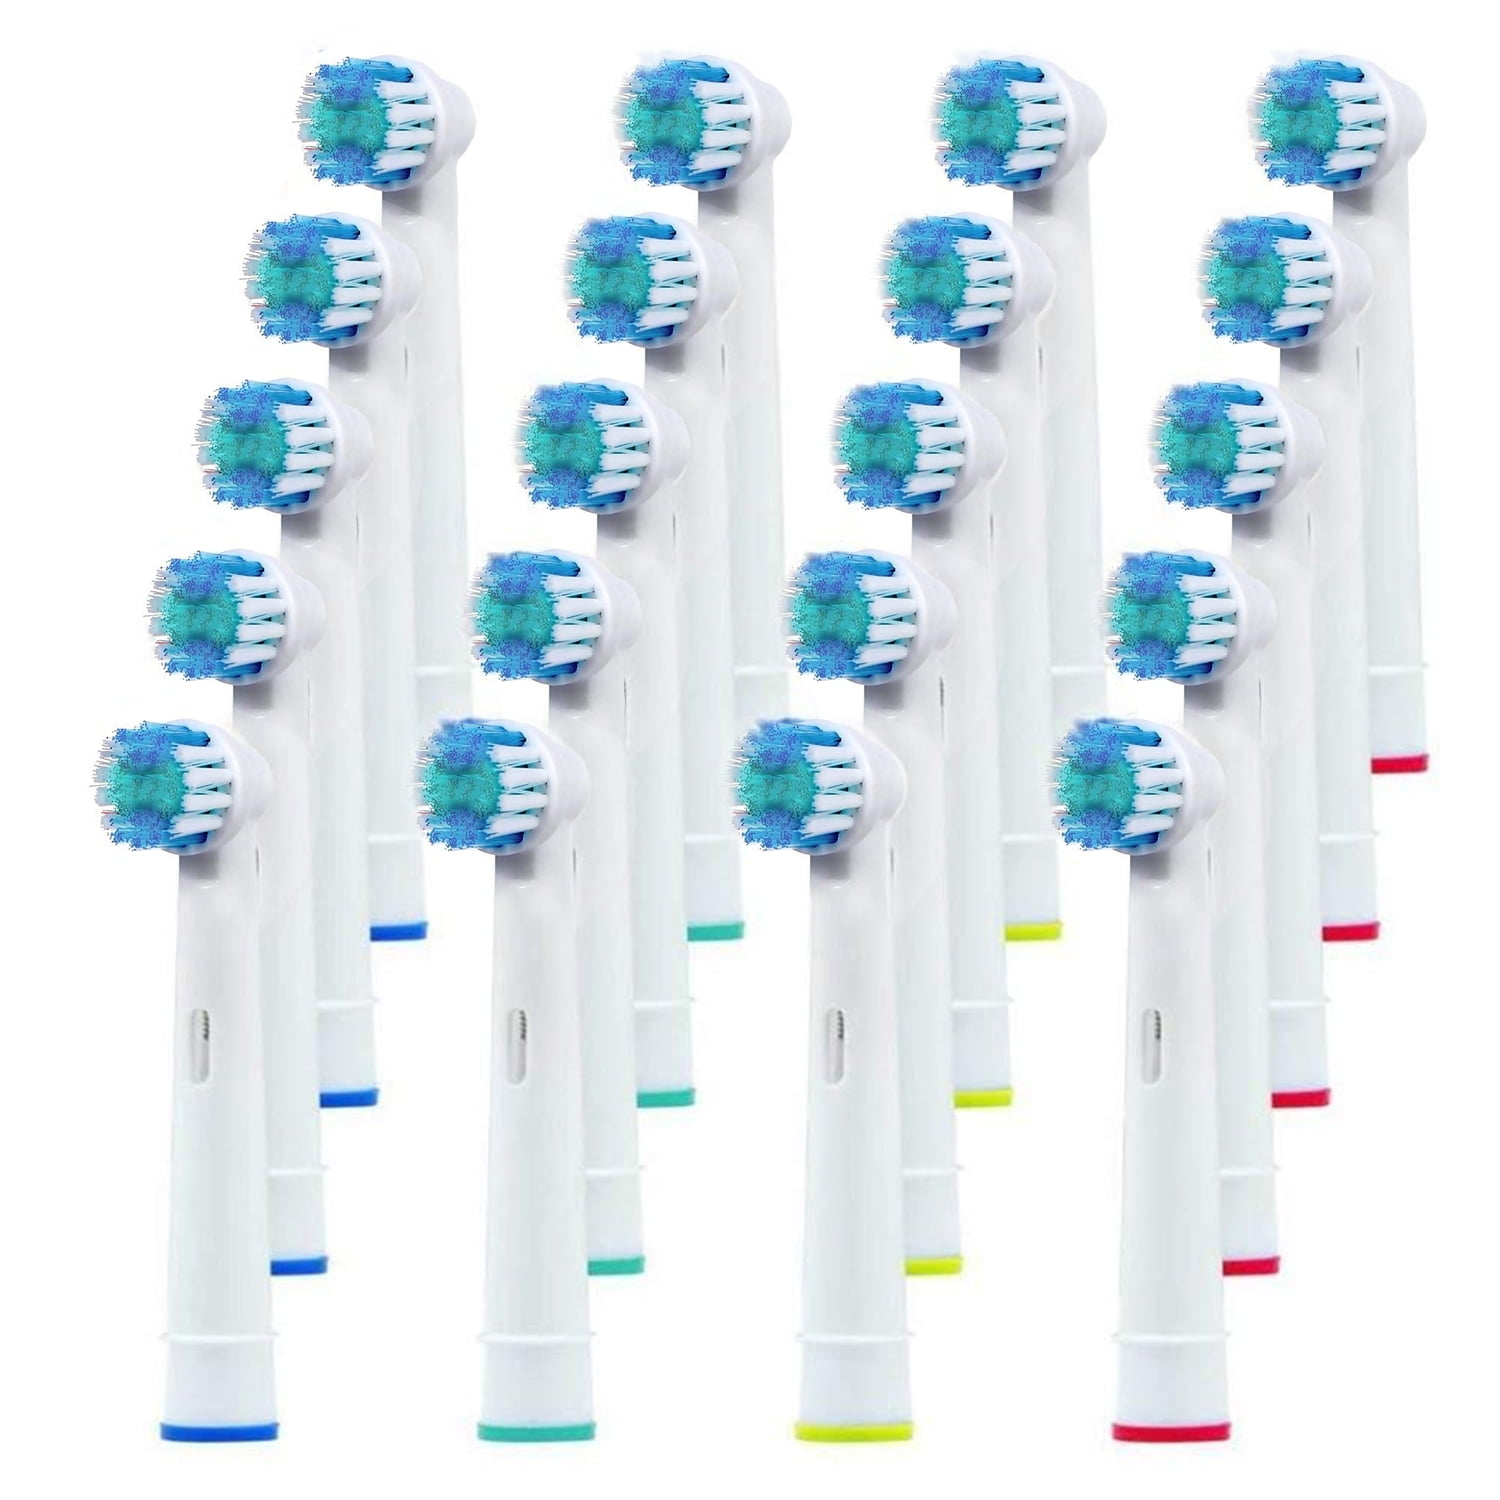 Replacement Brush Heads with Oral B Electric Toothbrush- 20 Pack of Precision Fits Braun Pro 1000 1500 Clean 3000 5000 8000 9000 Vitality, Triumph & More - Walmart.com